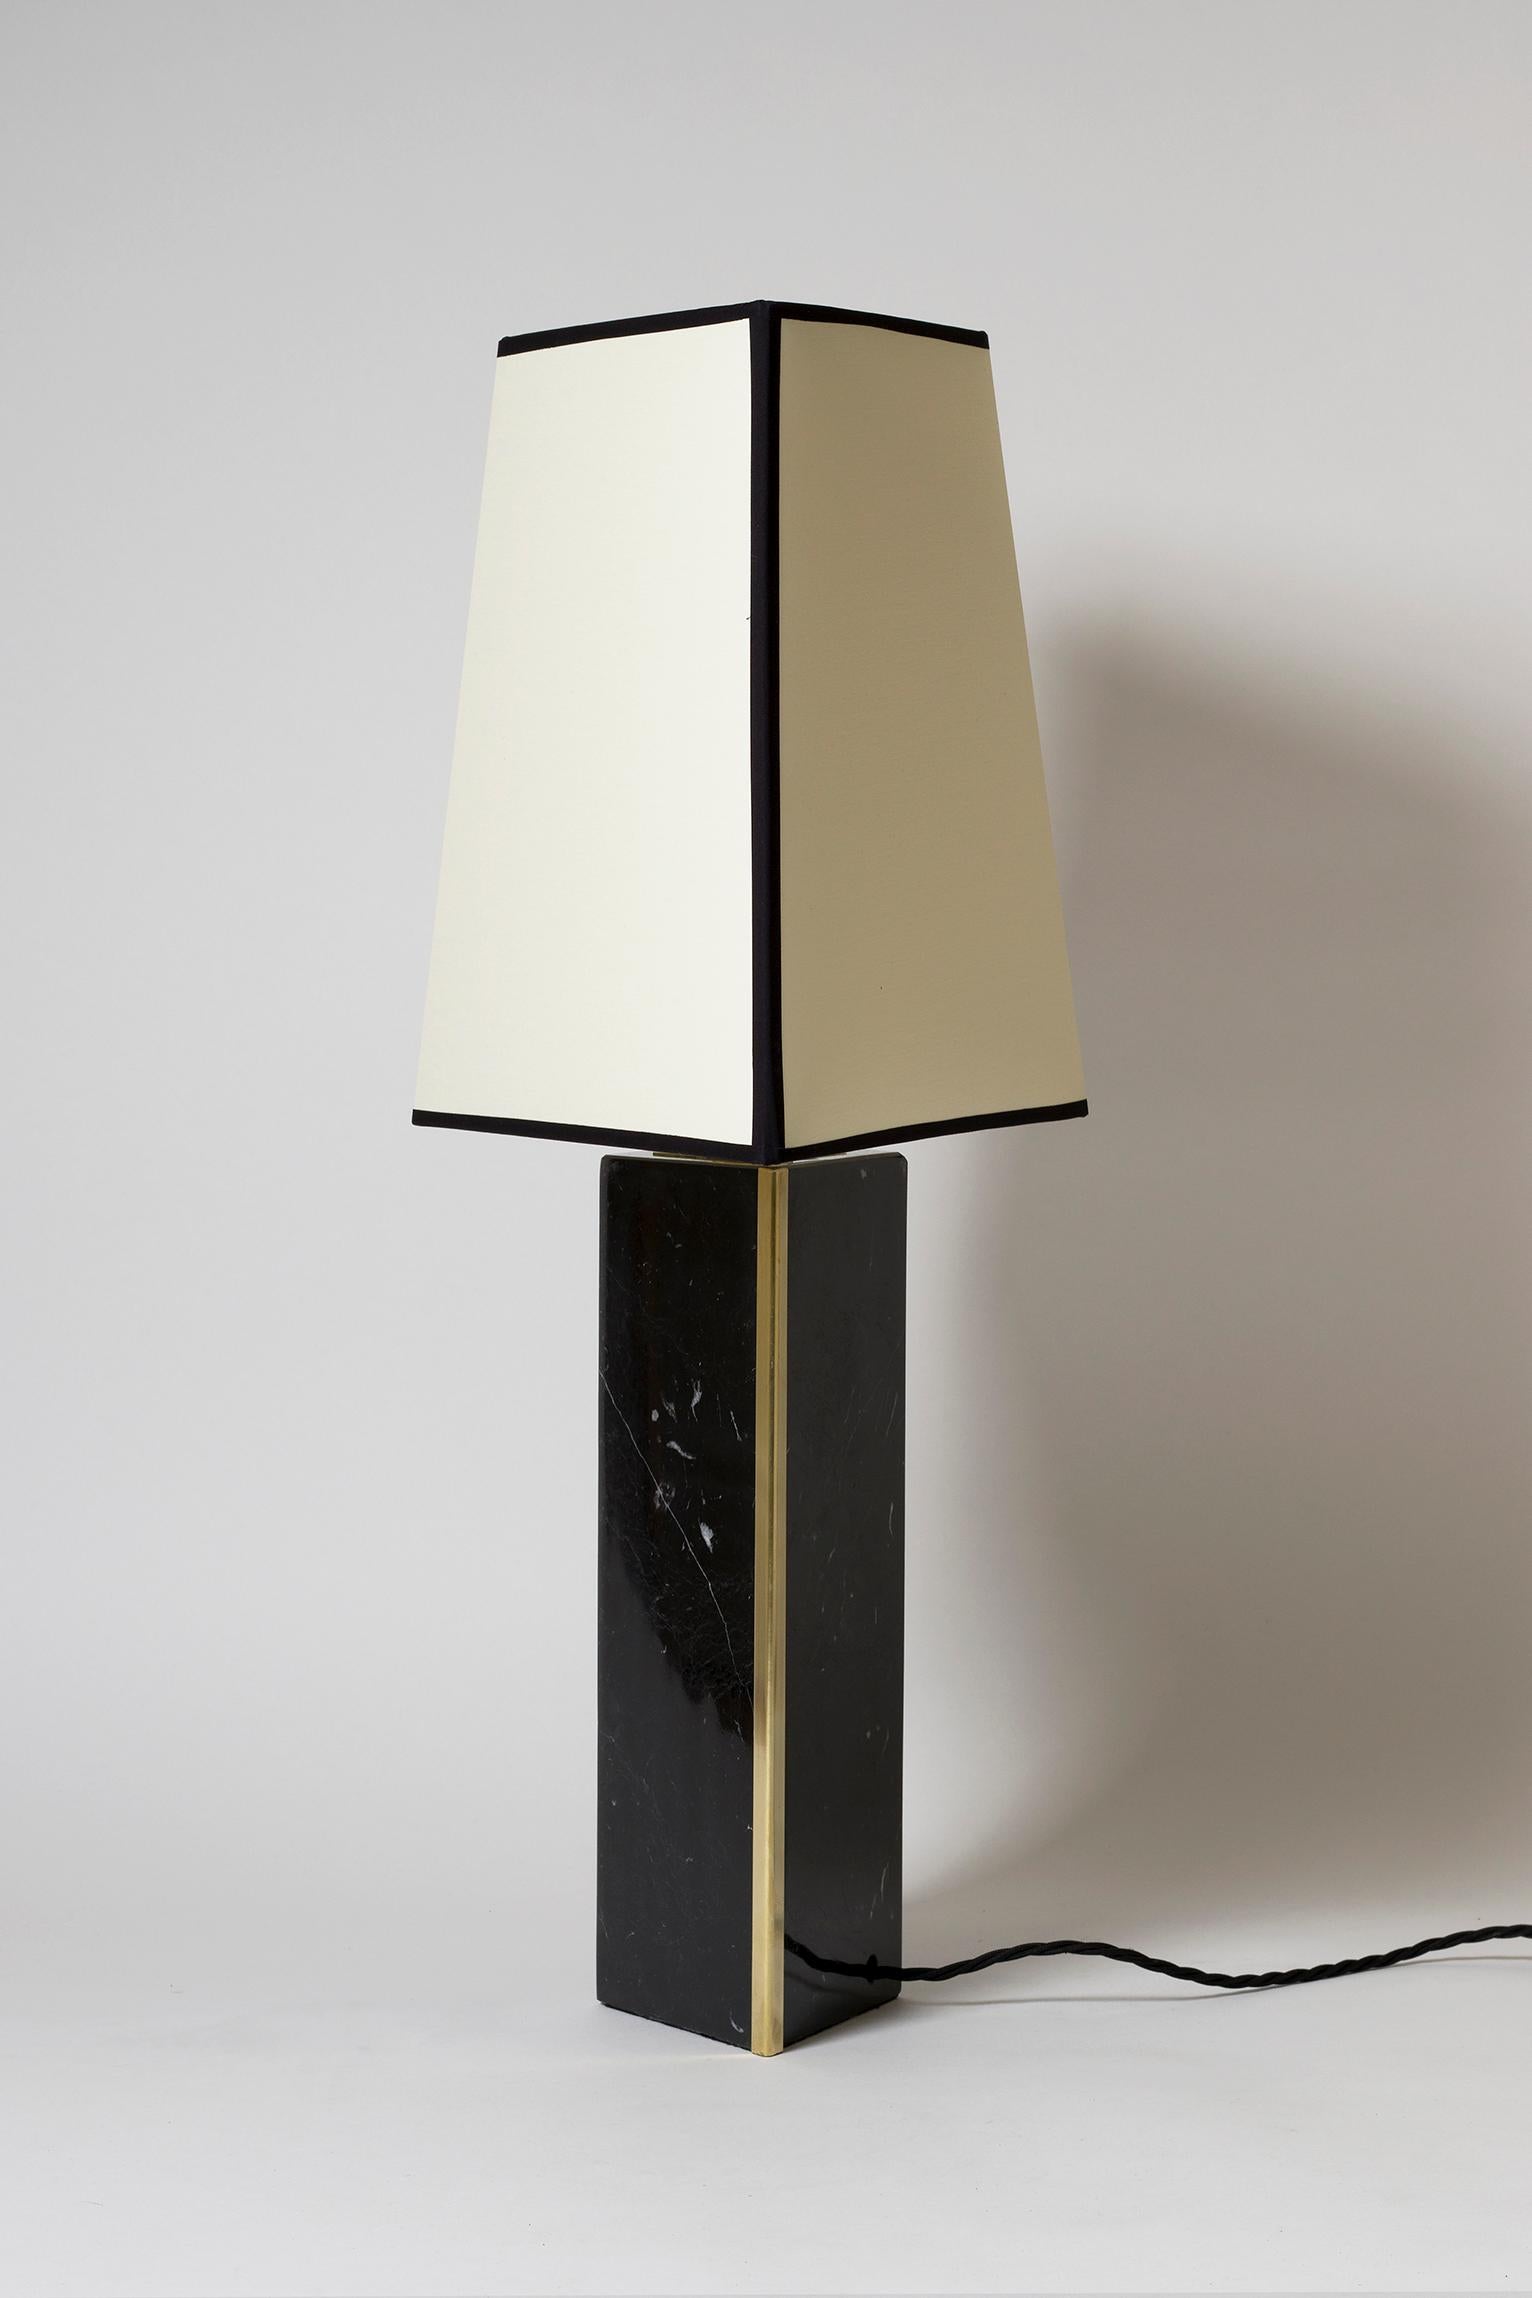 Mid-Century Modern 'Marine' Black Marble and Brass Table Lamp, by Dorian Caffot de Fawes